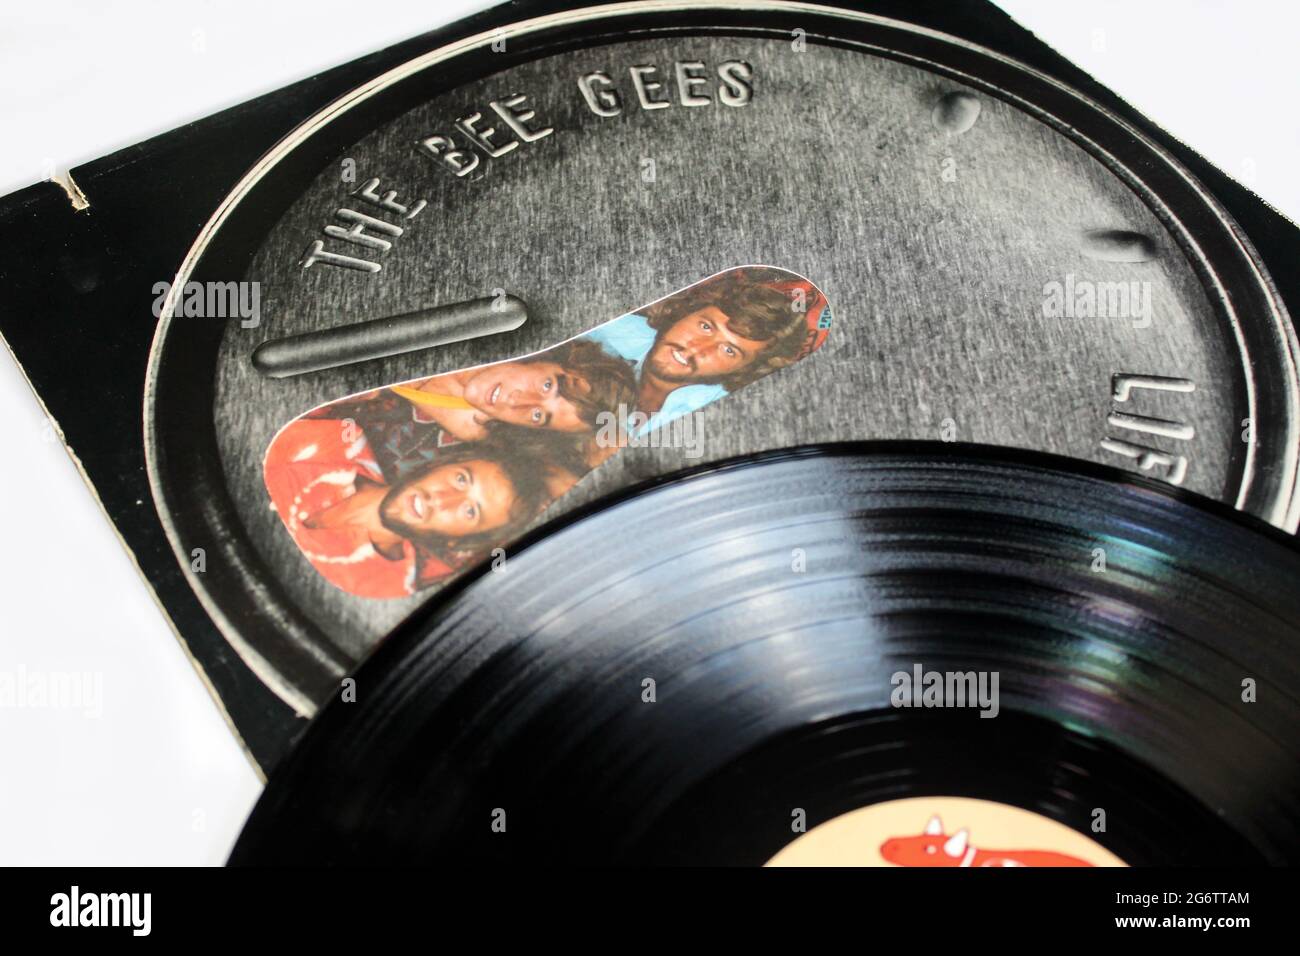 Disco and soul artists, the Bee Gees music album on vinyl record LP disc. Titled: Life in a Tin Can album cover Stock Photo